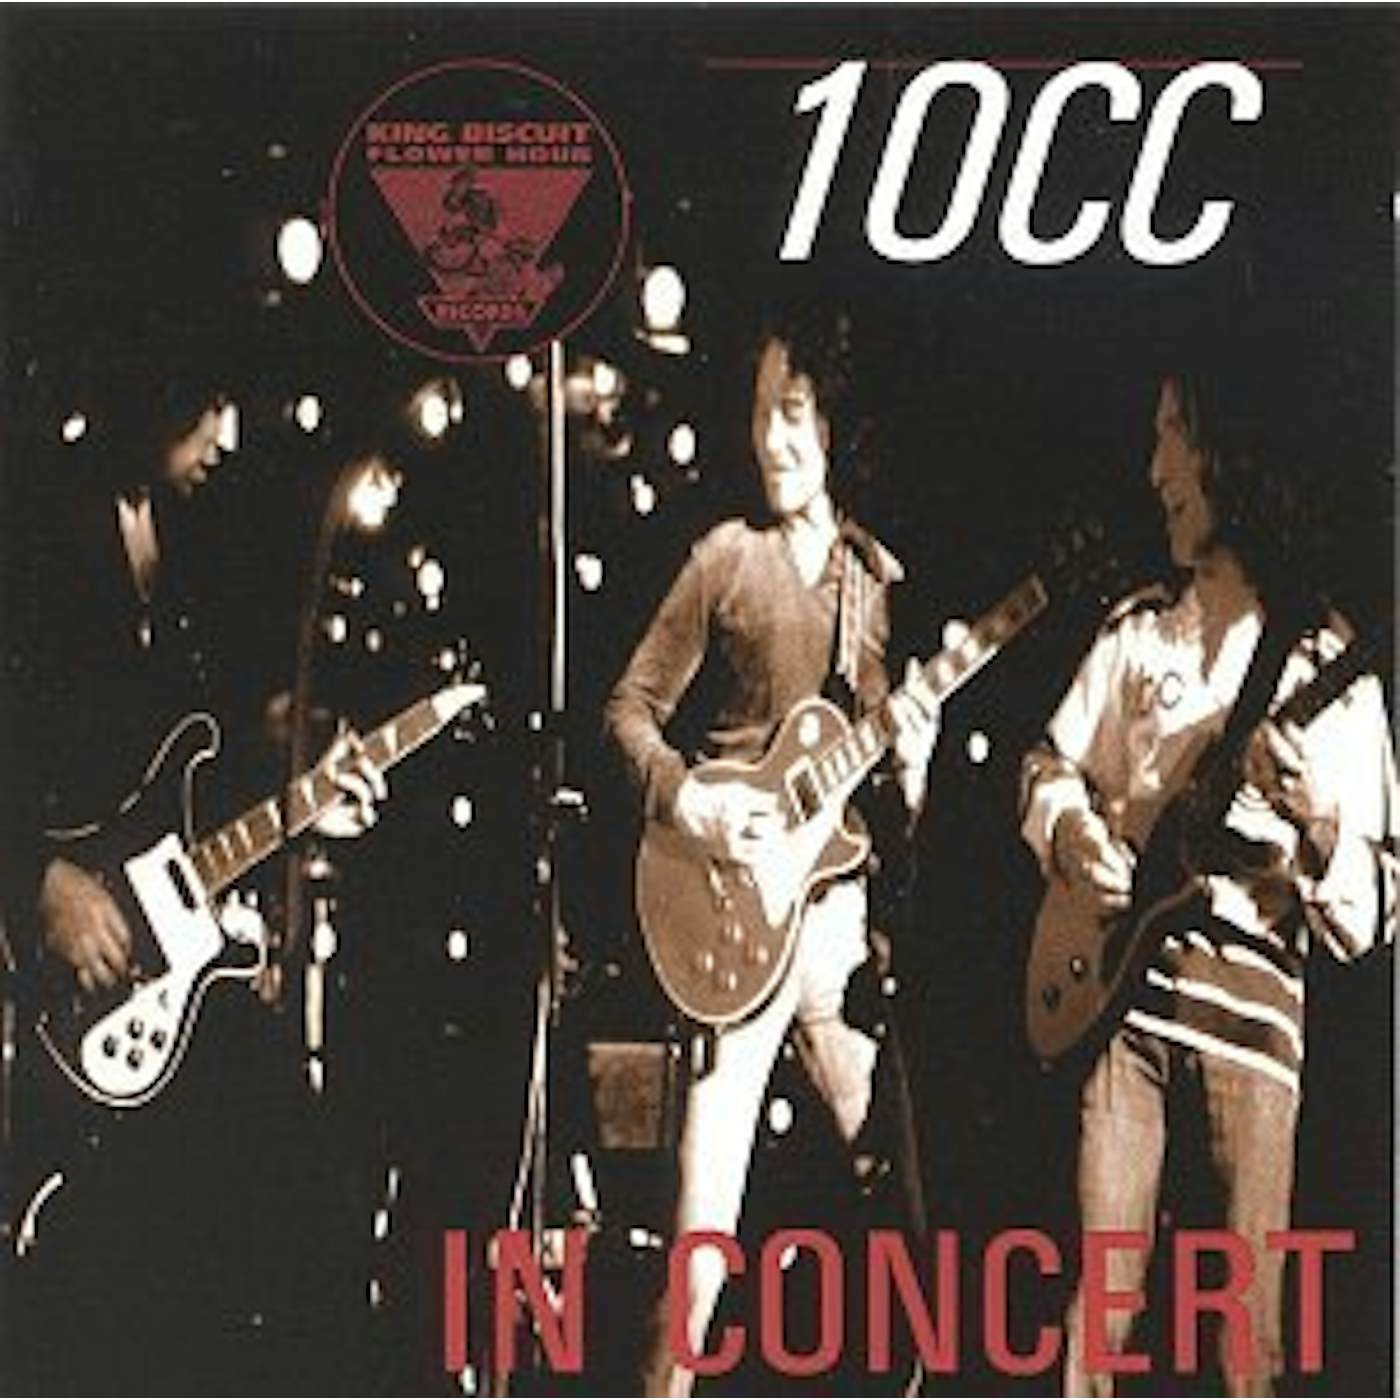 10cc KING BISCUIT FLOWER HOUR PRESENTS IN CONCERT CD